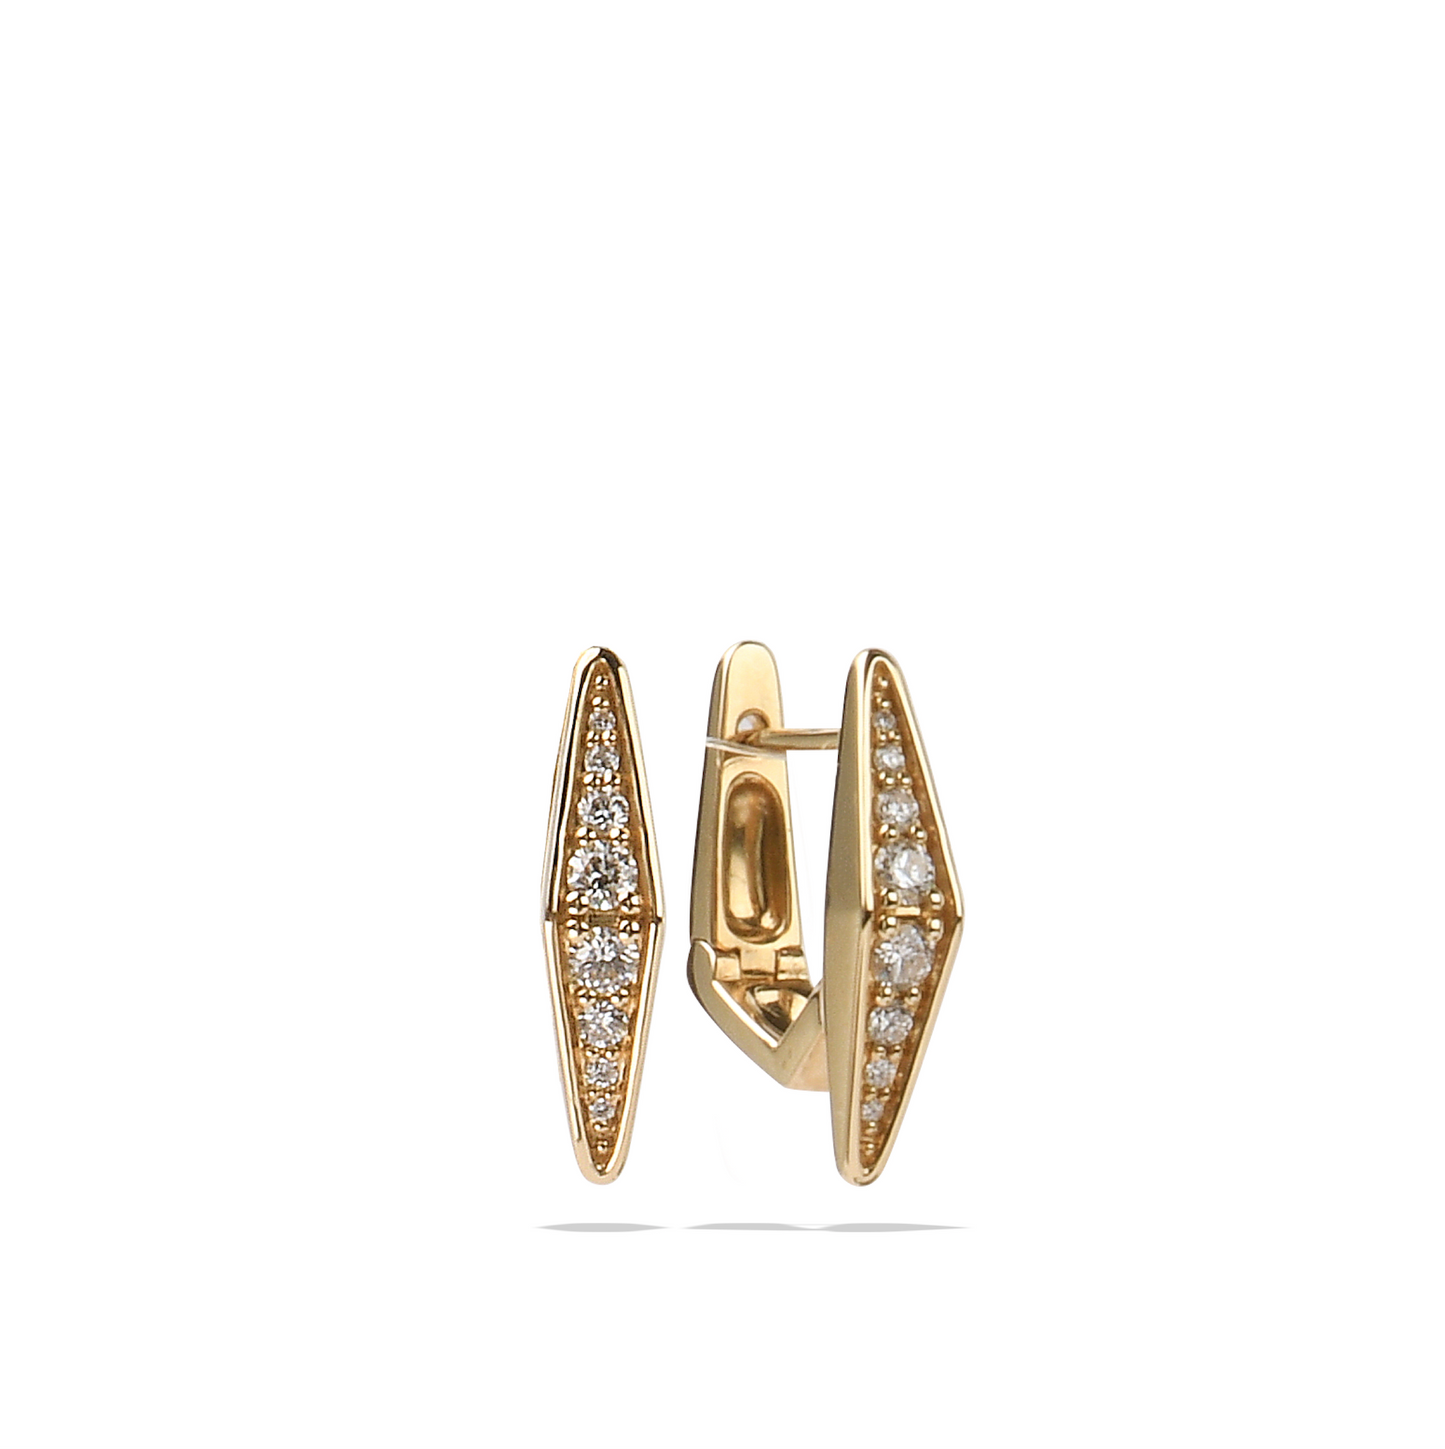 Gold Diamond Earrings | Yellow Gold and Natural White Diamonds Short Angle Earrings